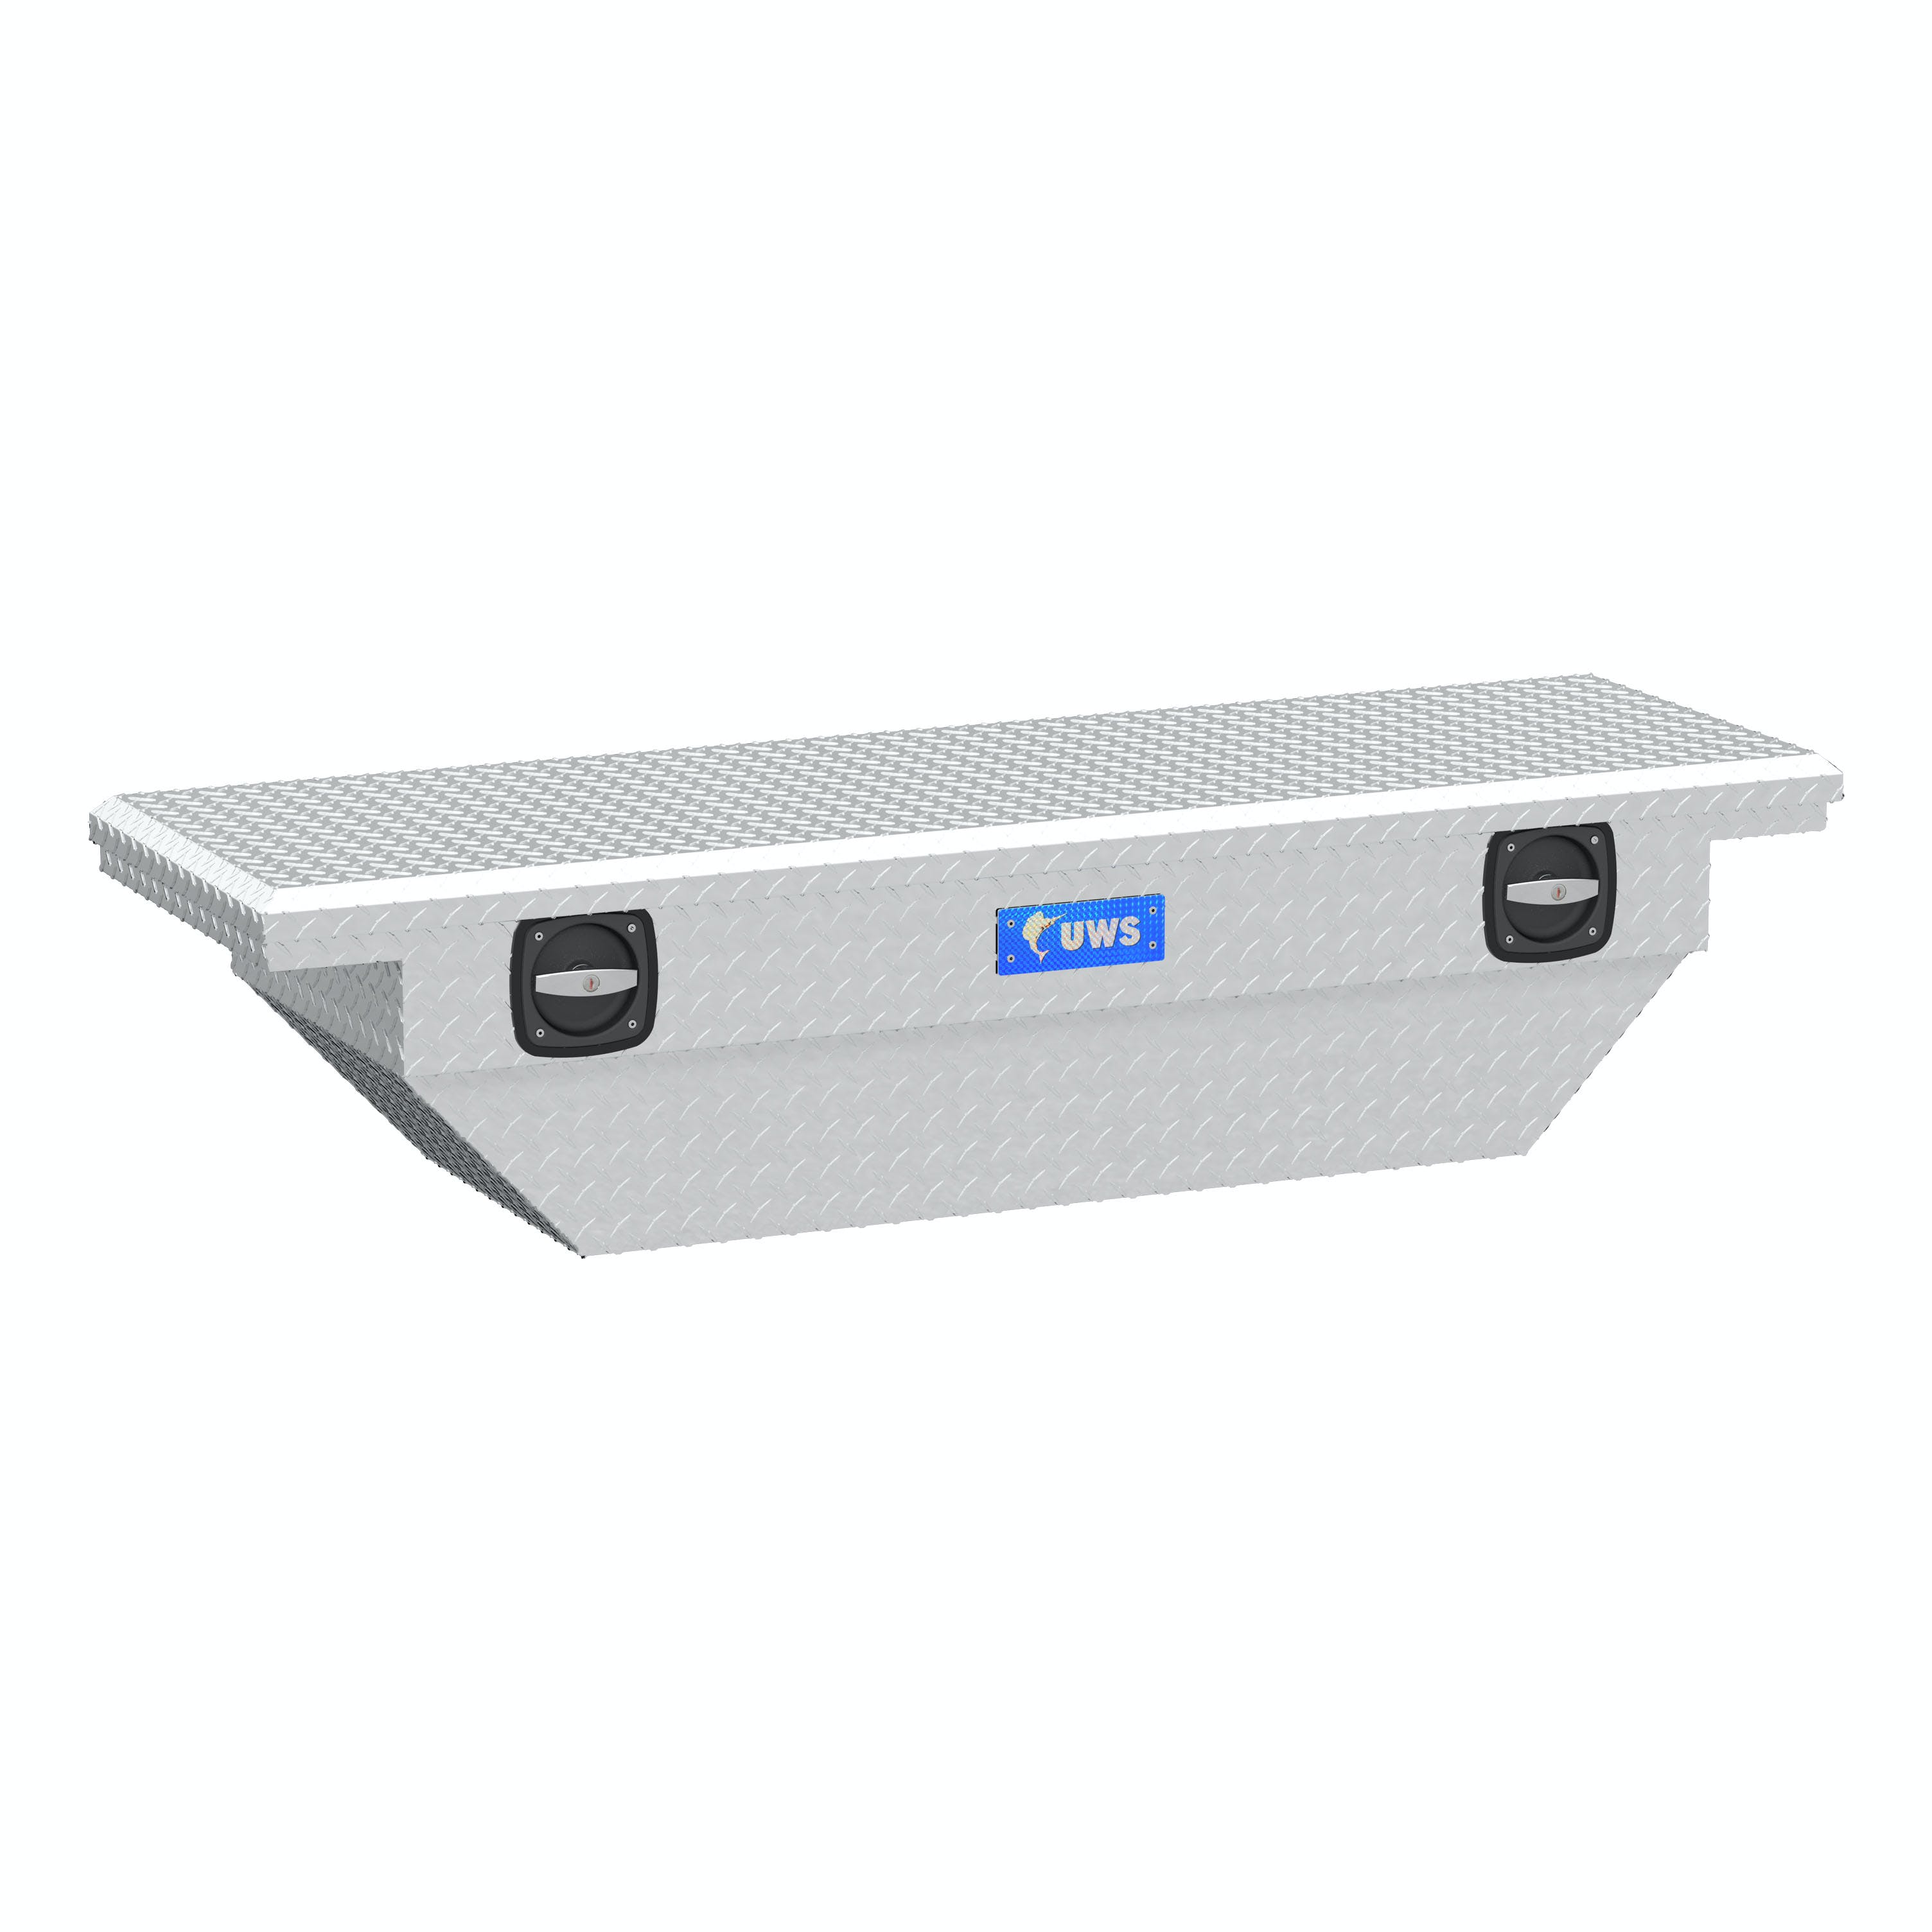 UWS SL-63-A-LP Aluminum 63 inch Secure Lock Angled Truck Tool Box, Low Profile (LTL Shipping Only)